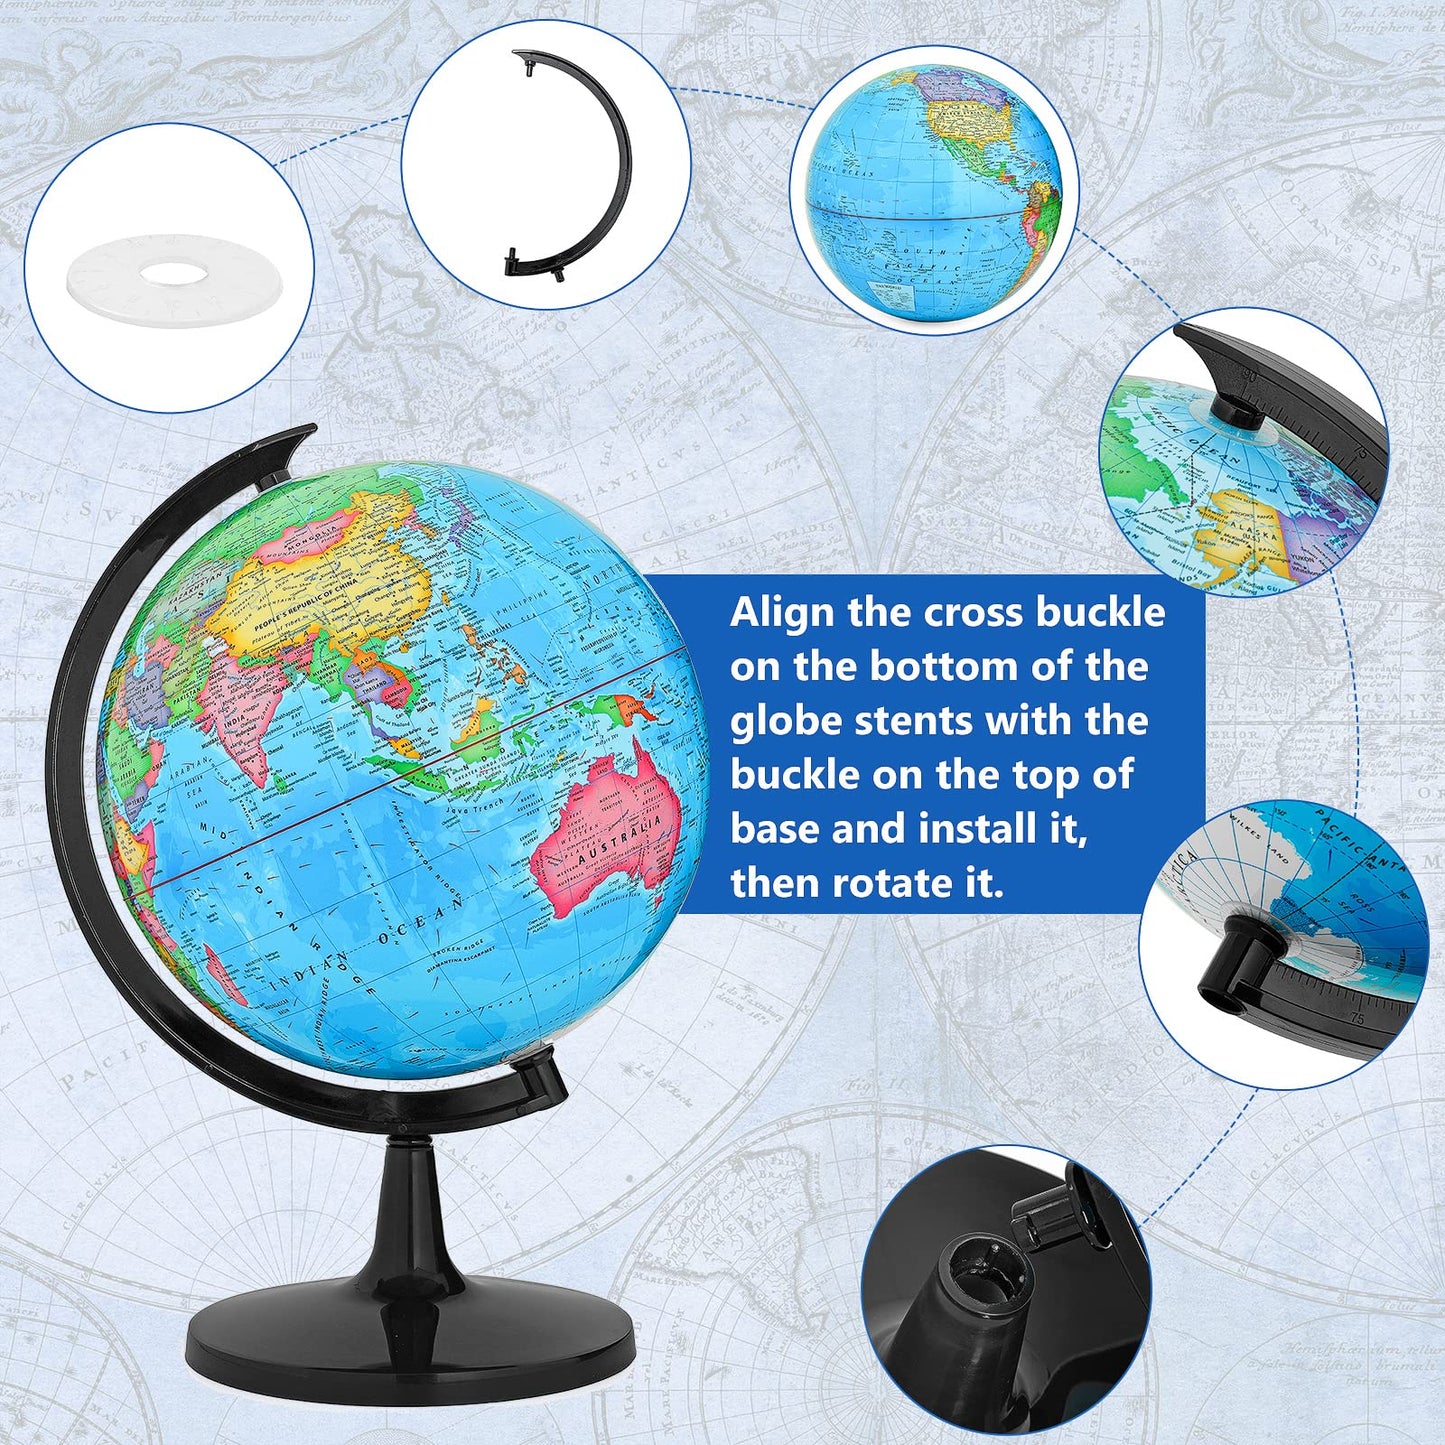 World Globe with Stand, 13" Geography Educational Globe for Students & Teachers, 360° Spinning Globe, Full Length 19.7 inch World Globes for